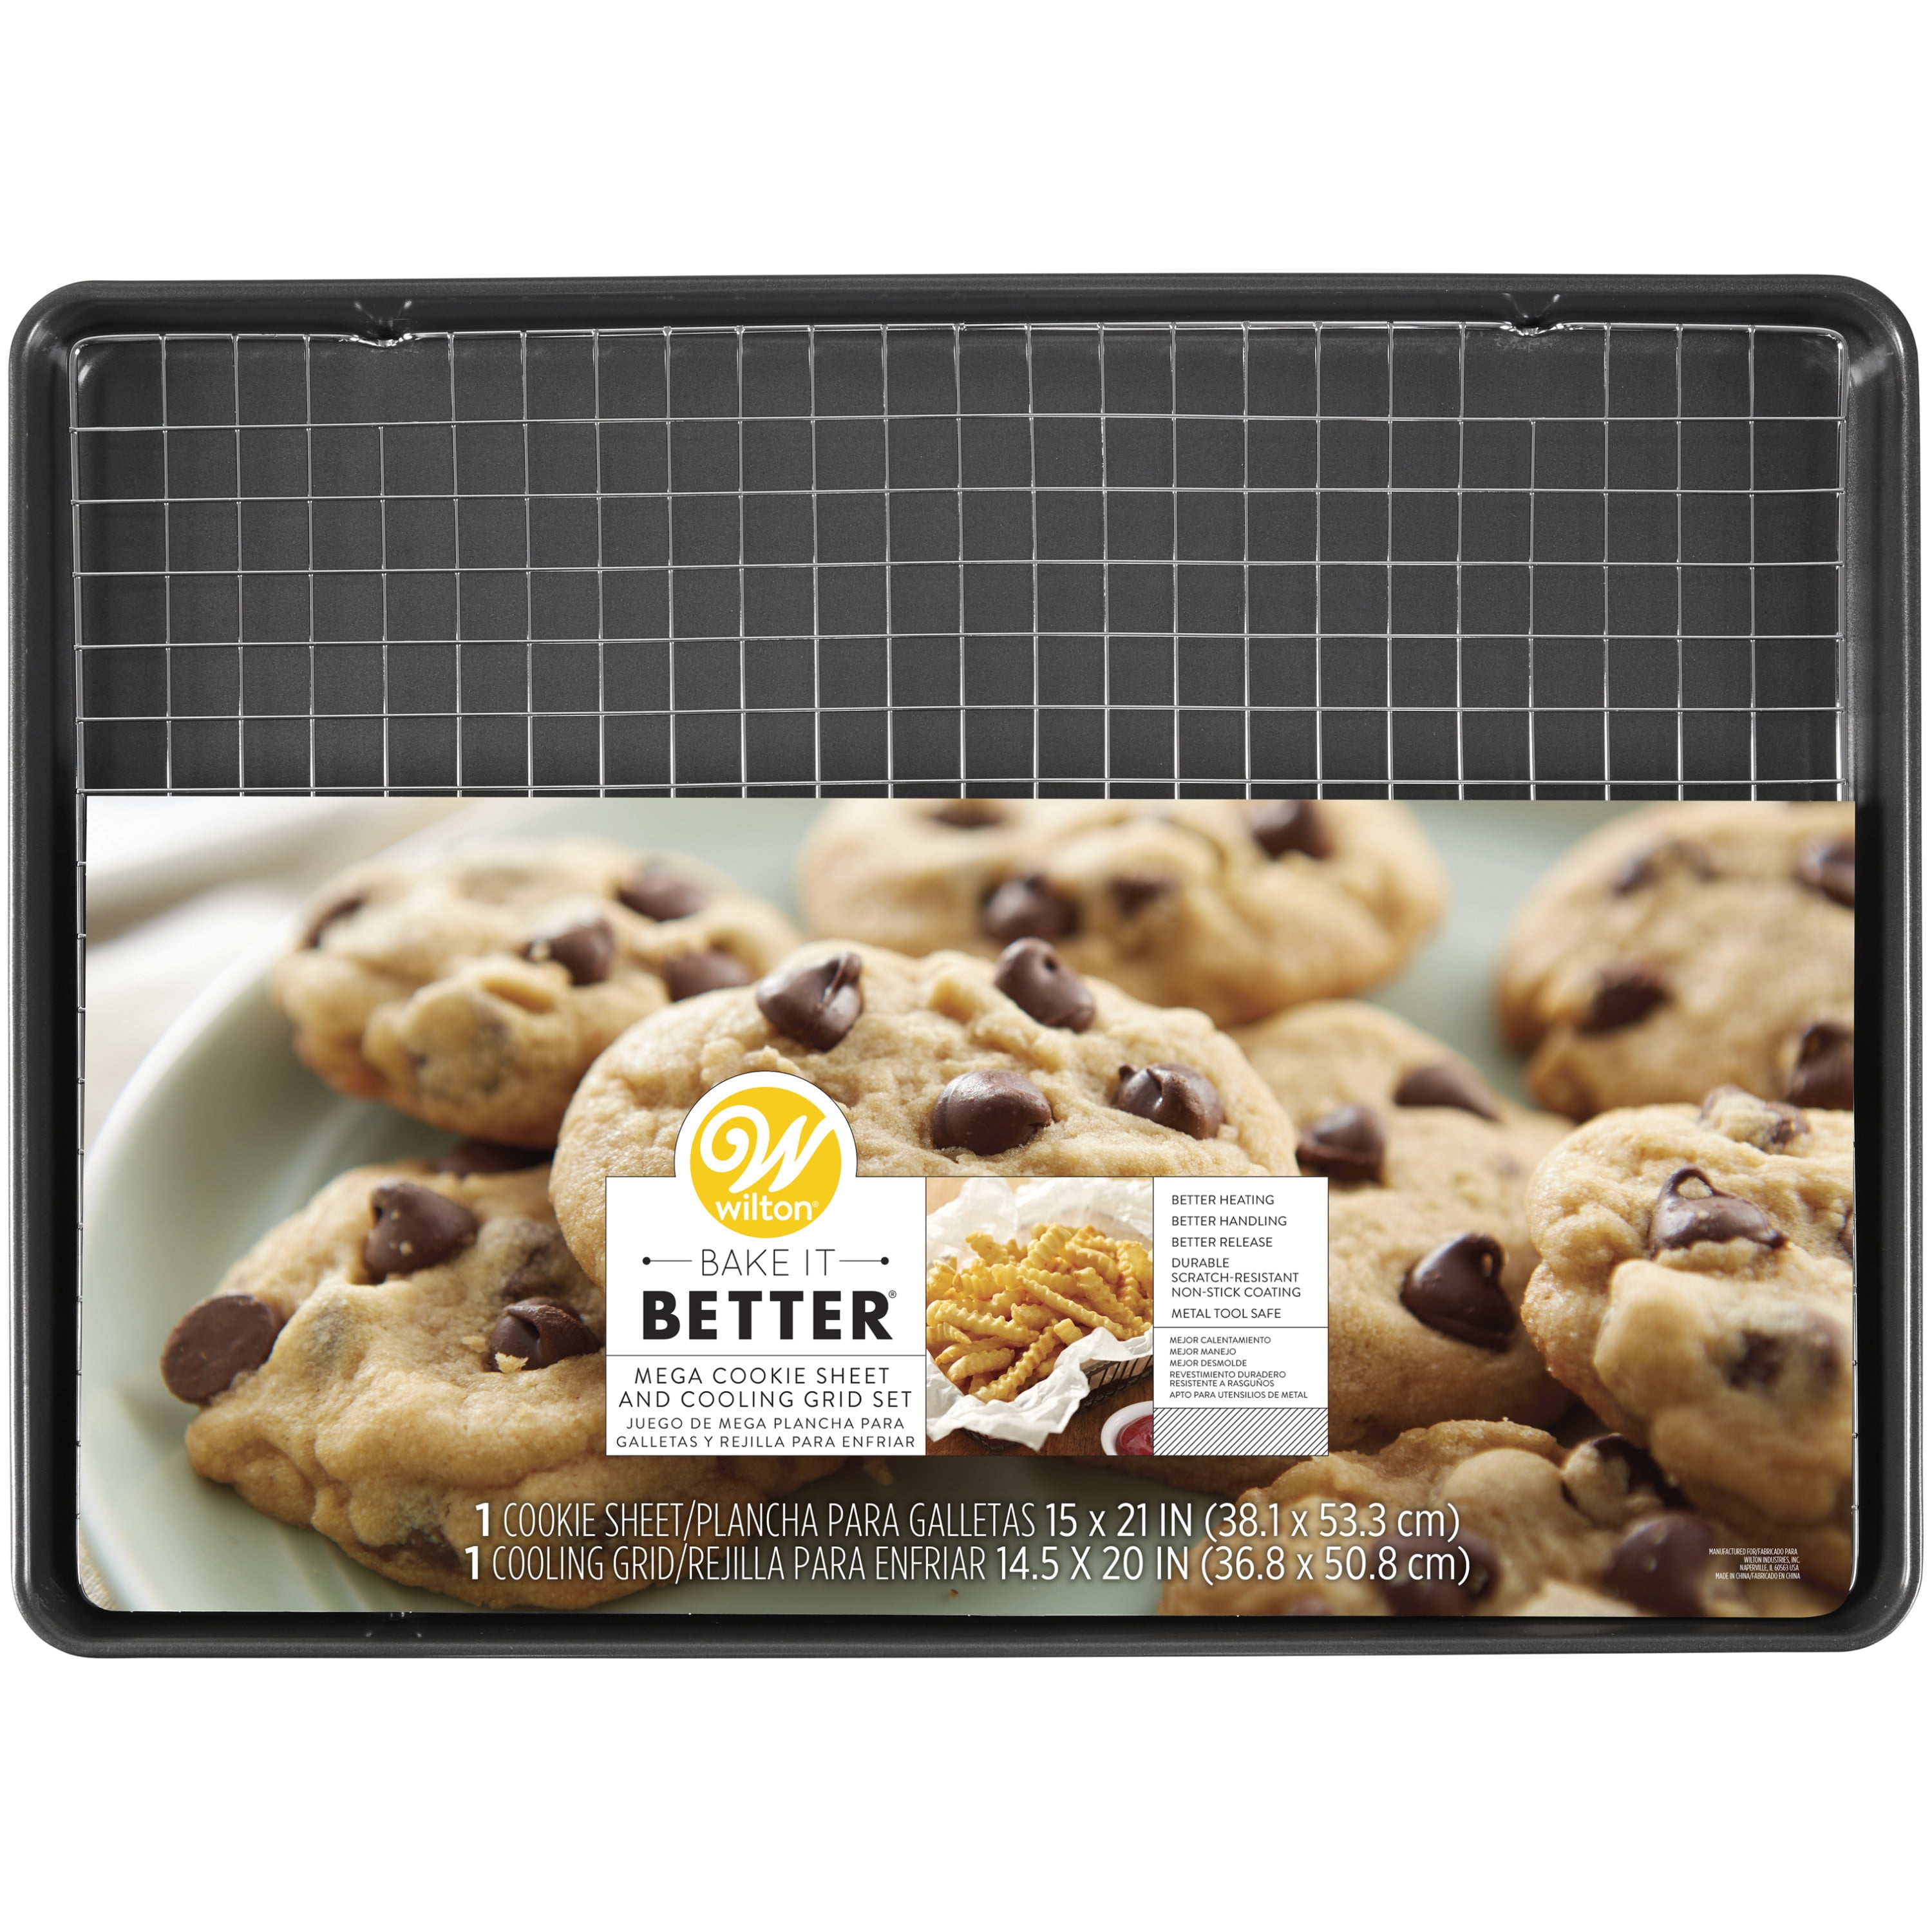 Wilton Perfect Results Baking Sheet 15 x 21 (1 ct) Delivery